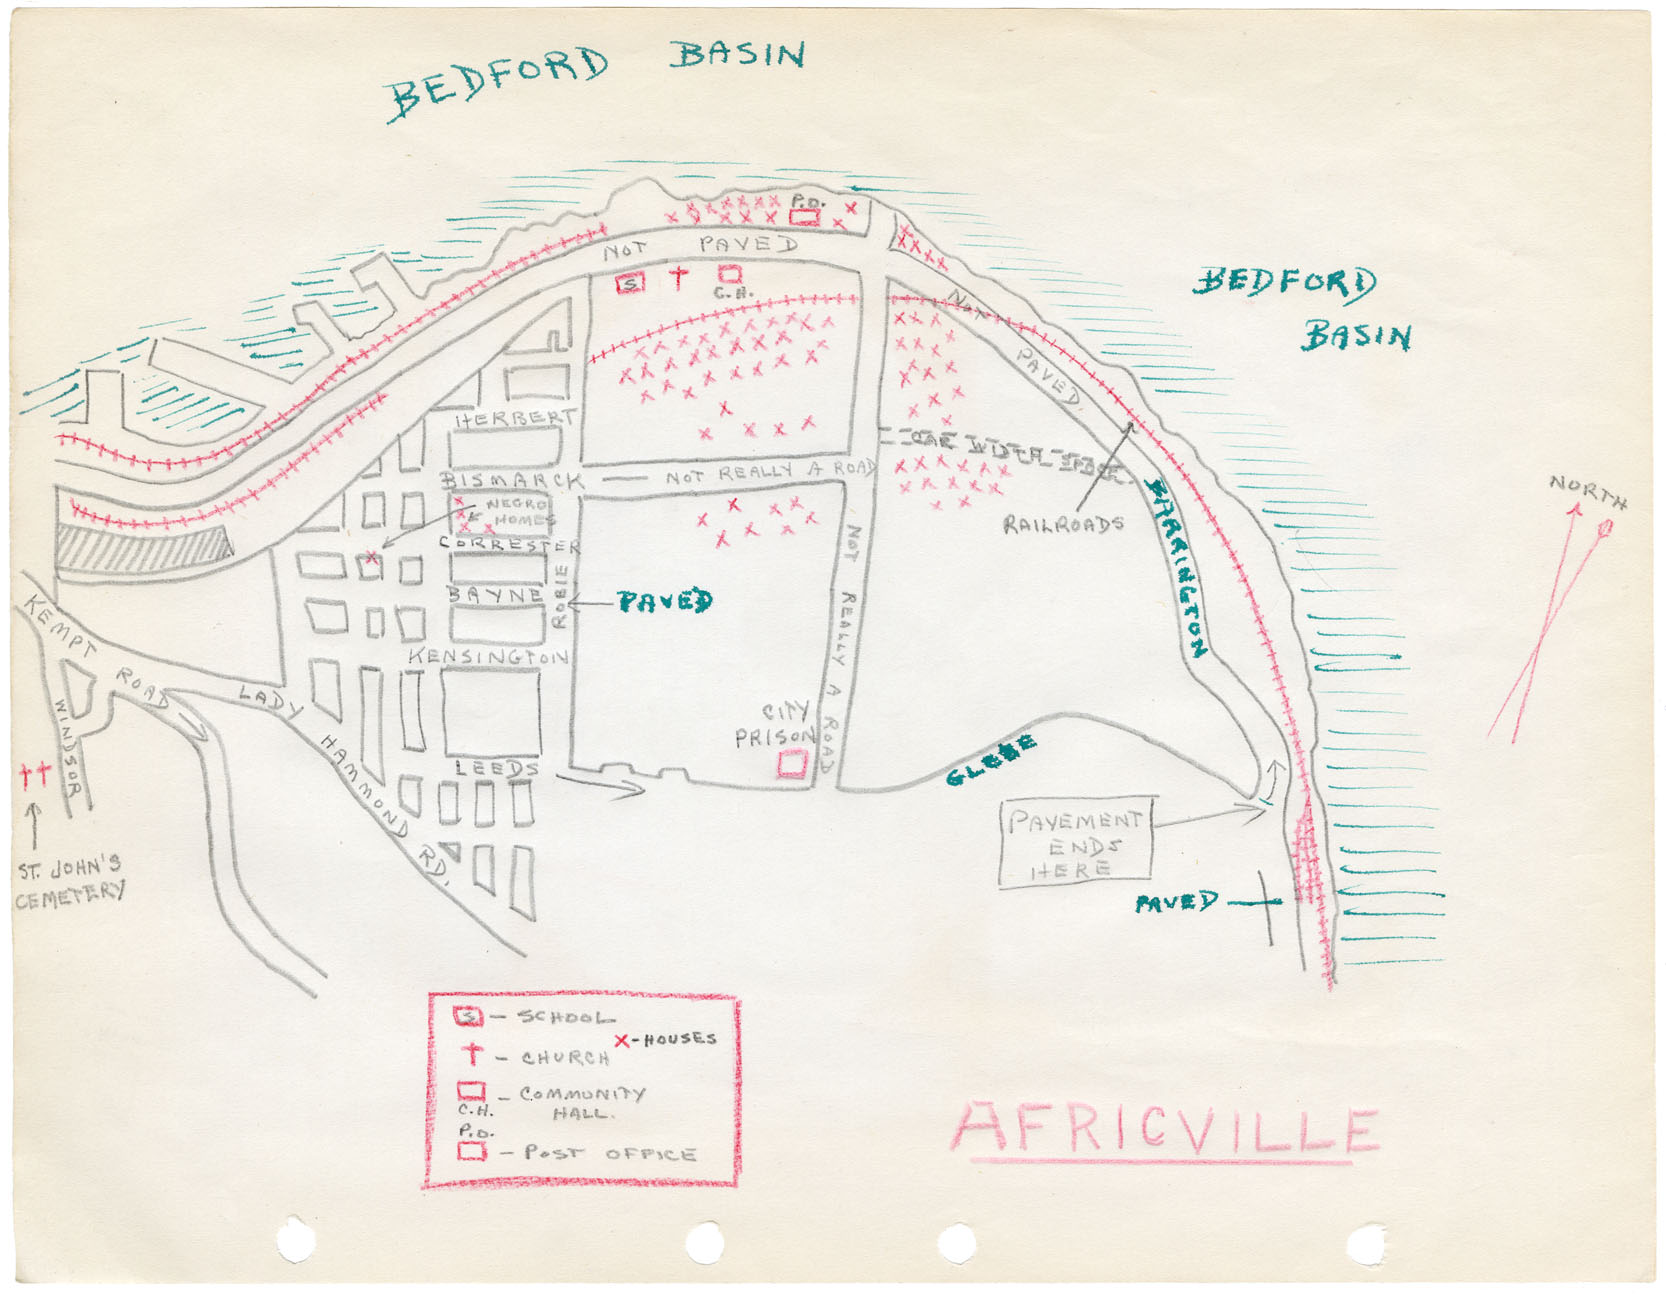 african-heritage : Page 30 - Sketch map of Africville